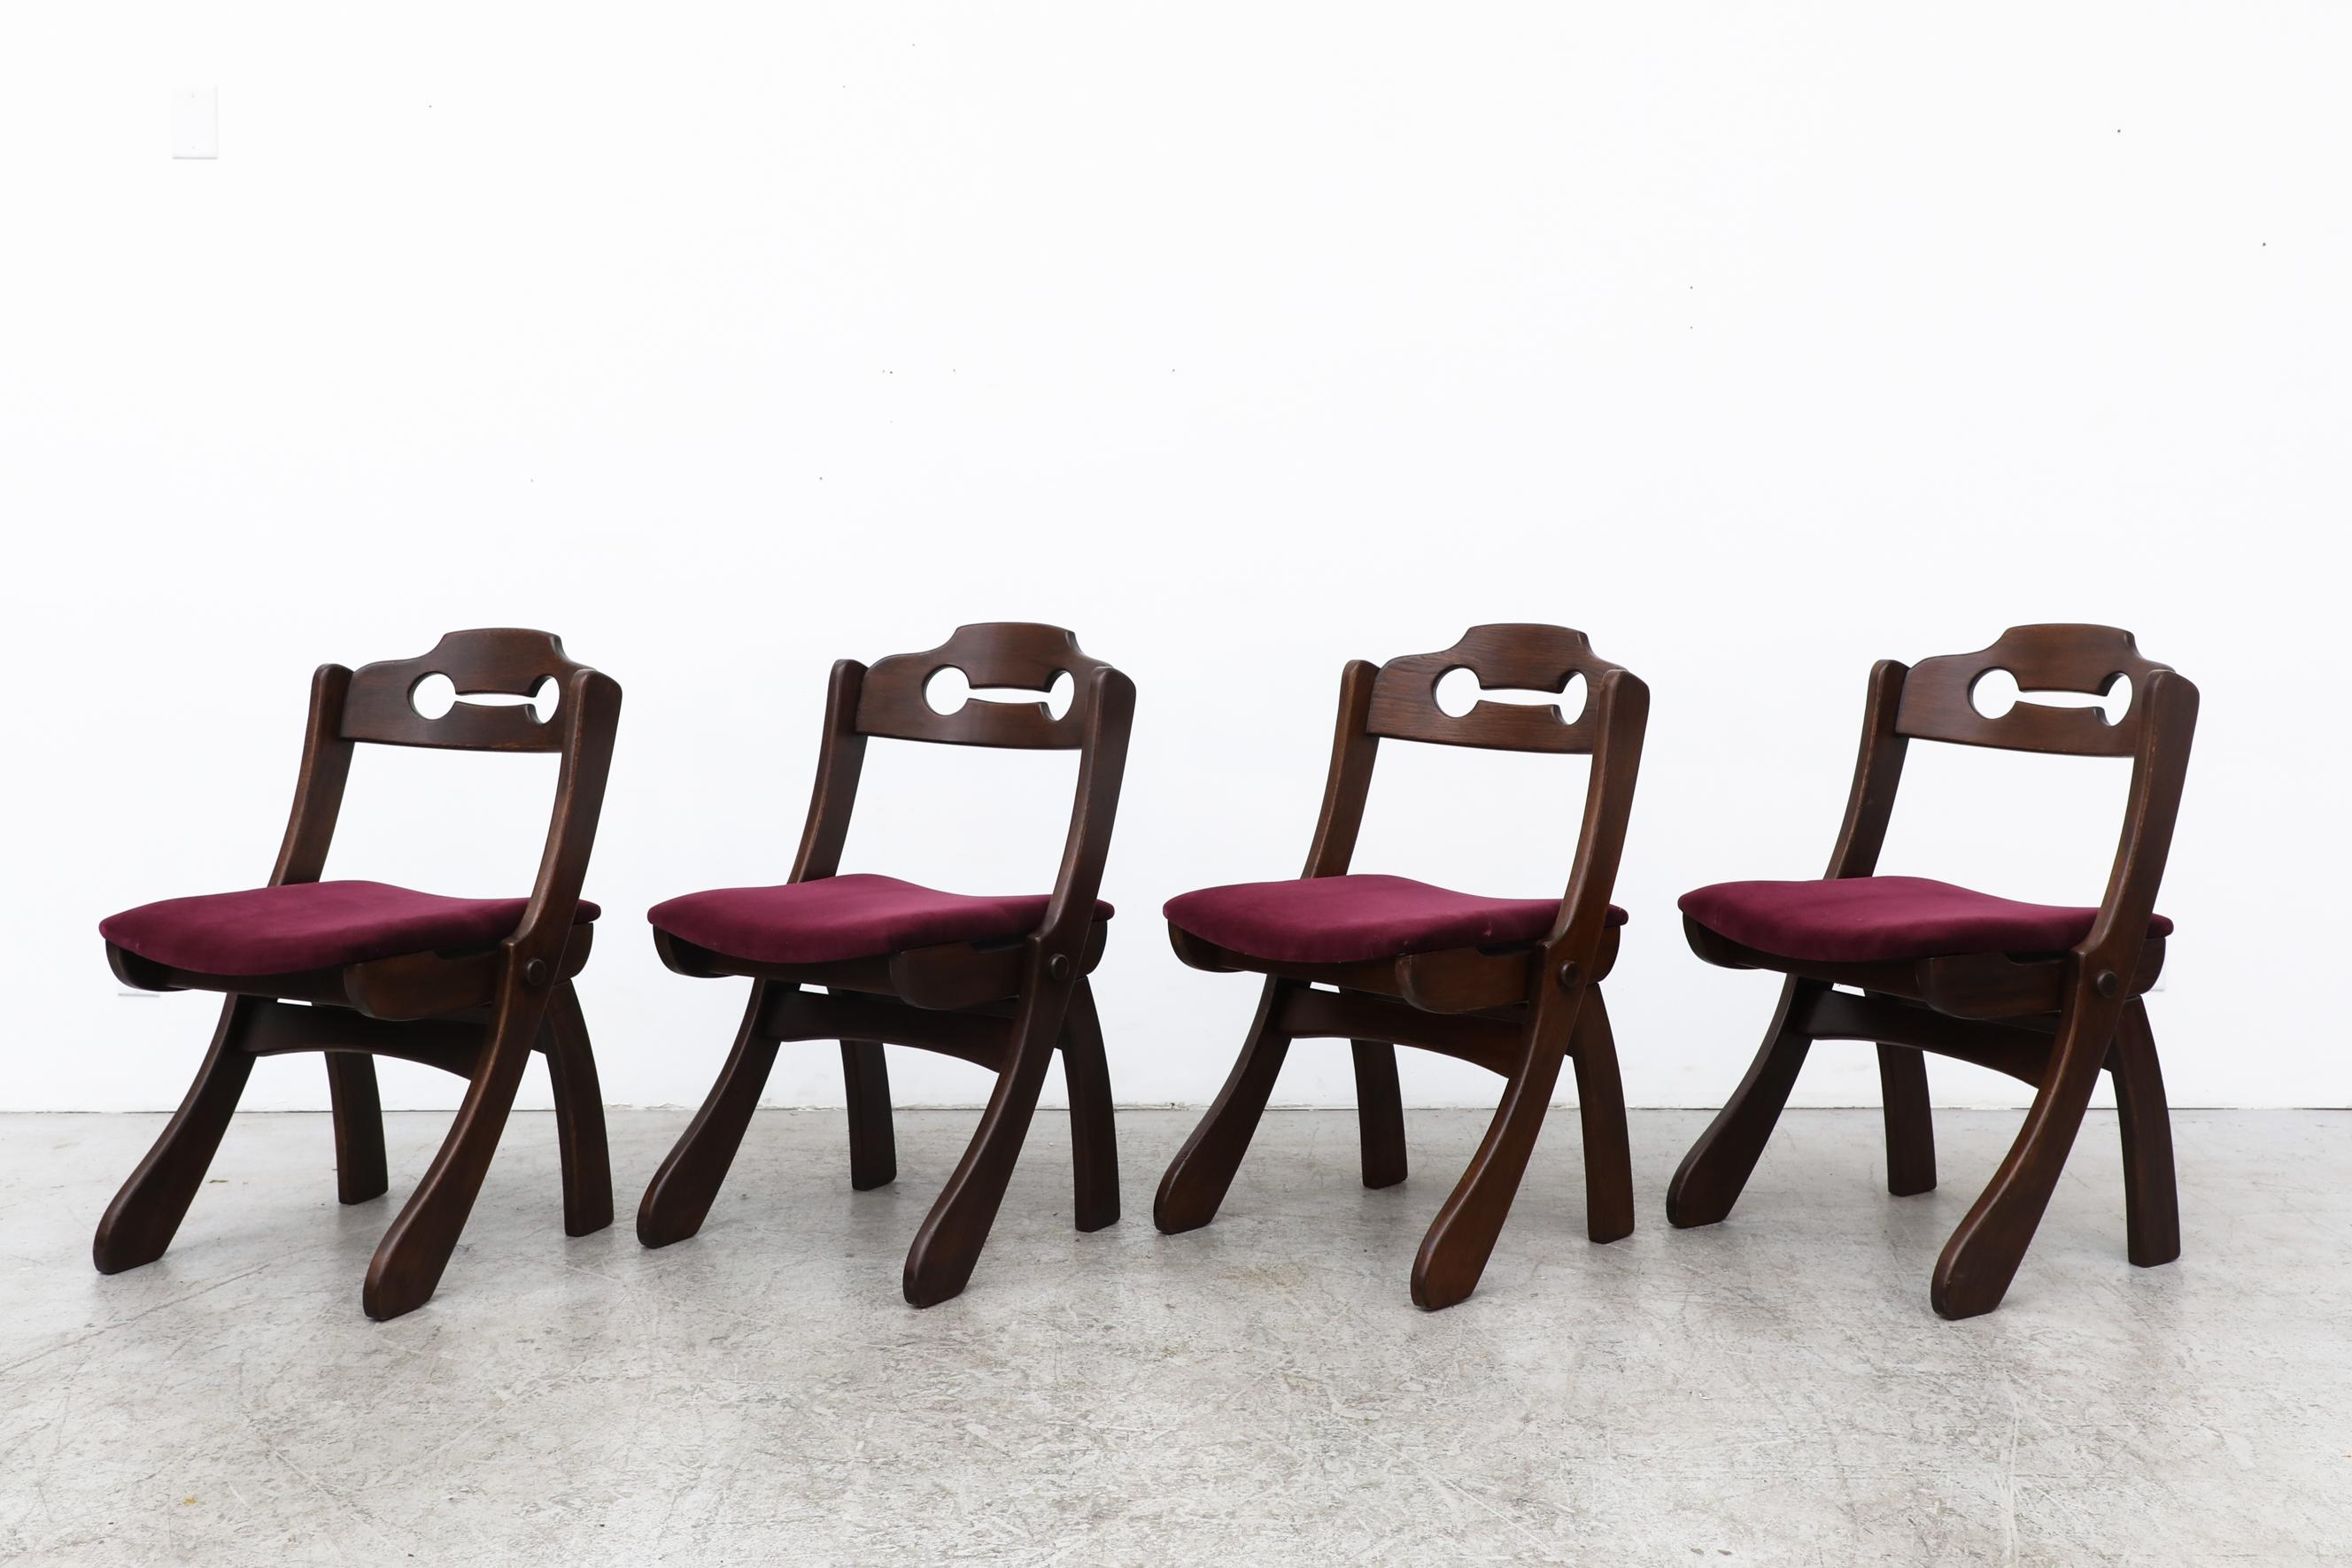 Set of 4 Dark Stained Brutalist Razor Back Chairs with New Burgundy Velvet Seats In Good Condition For Sale In Los Angeles, CA